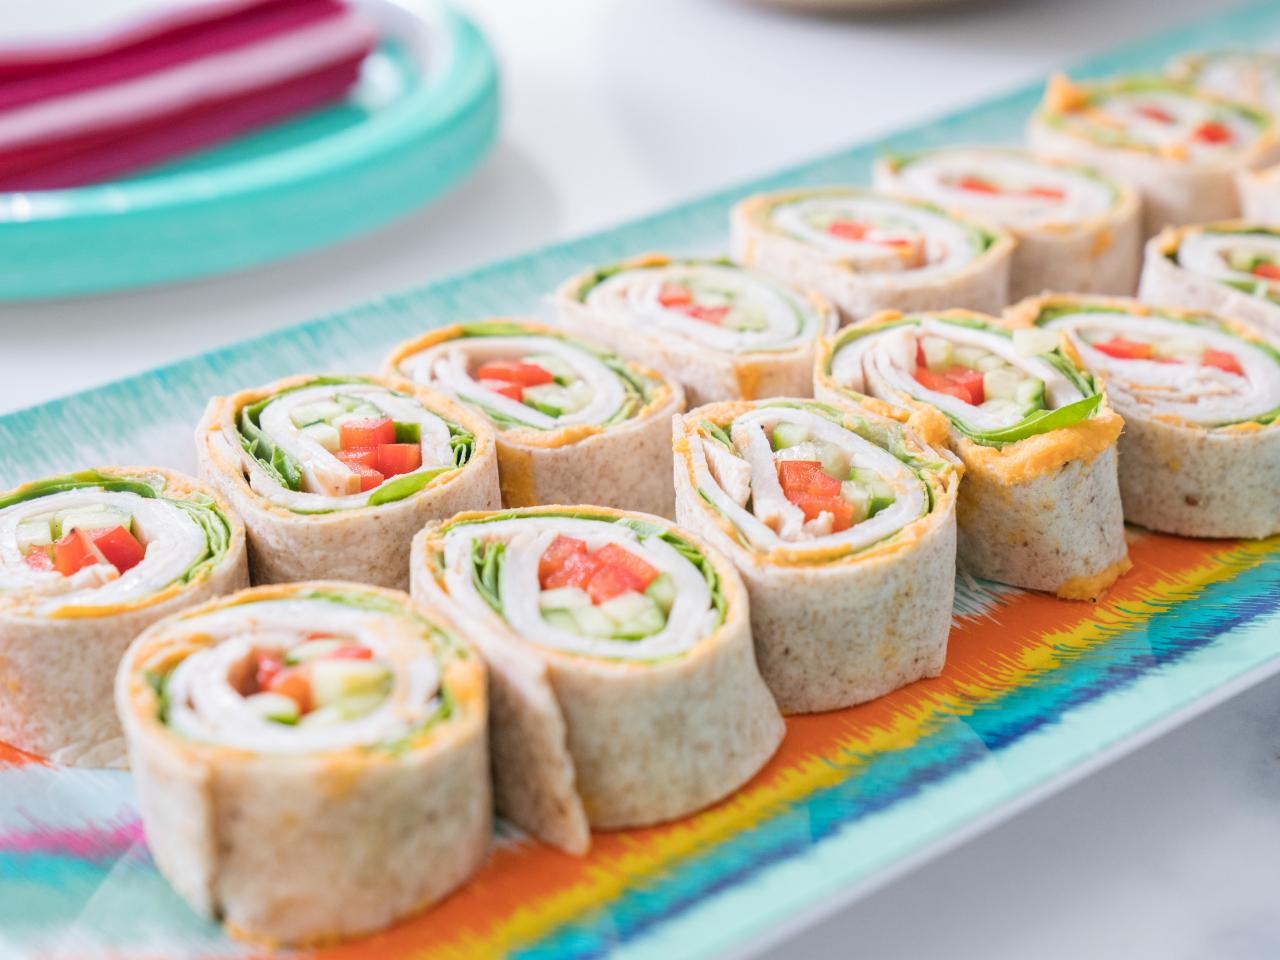 35 Easy School Lunches for Kids, School Lunchbox Ideas